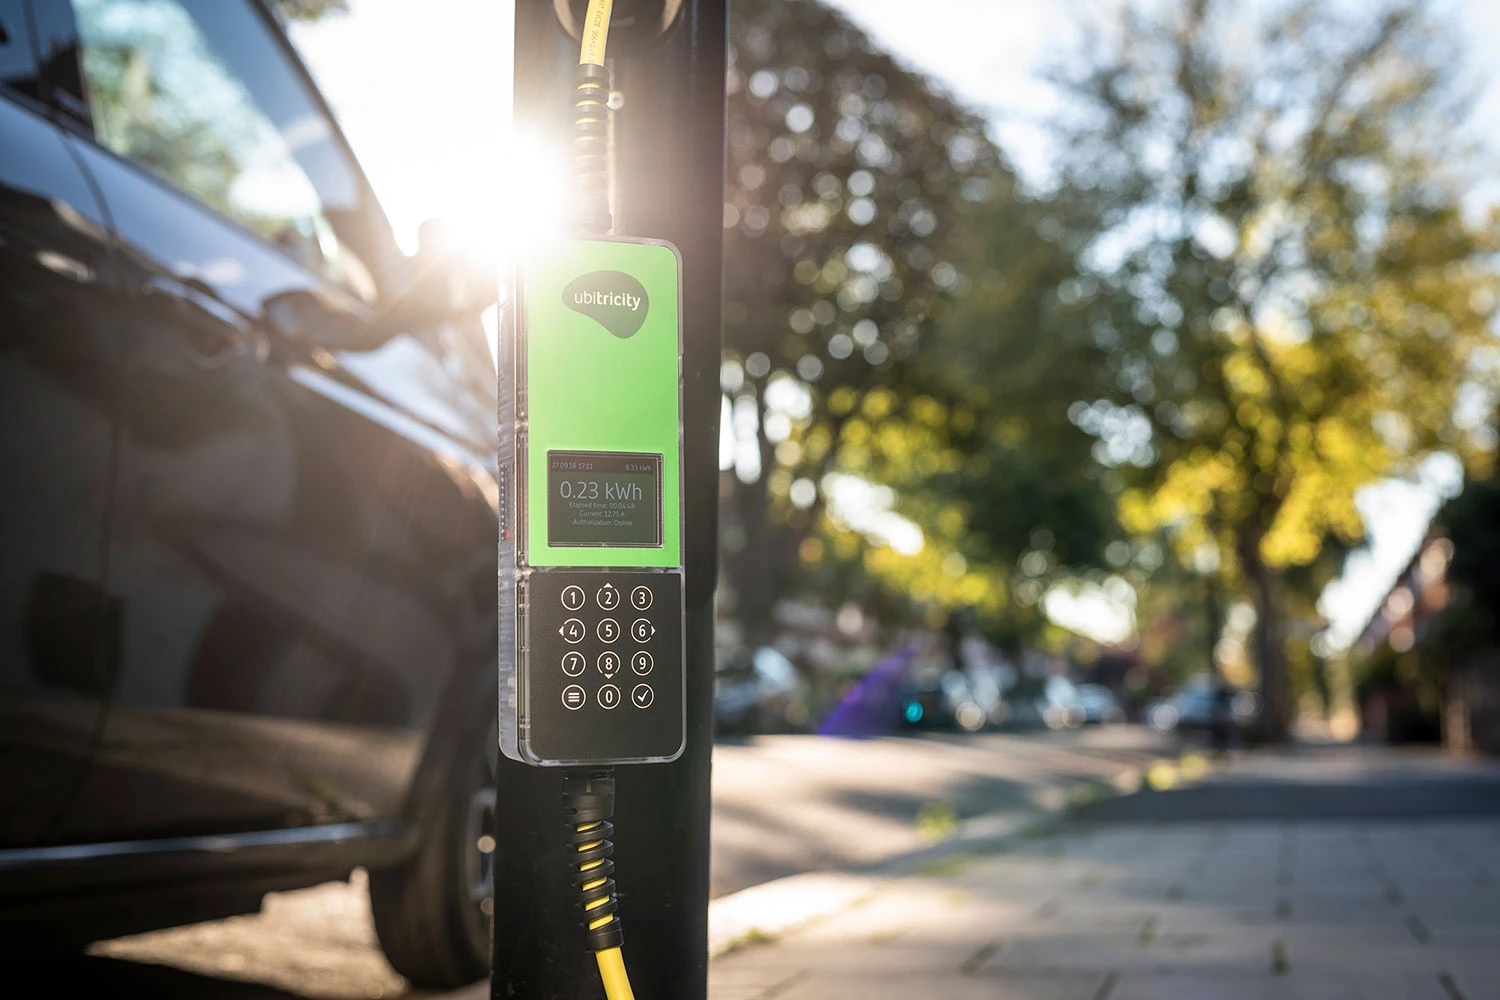 An EV is connected to a charging station with a phased-out ubitricity Smart Cable, which offered convenient charging at fixed rates.